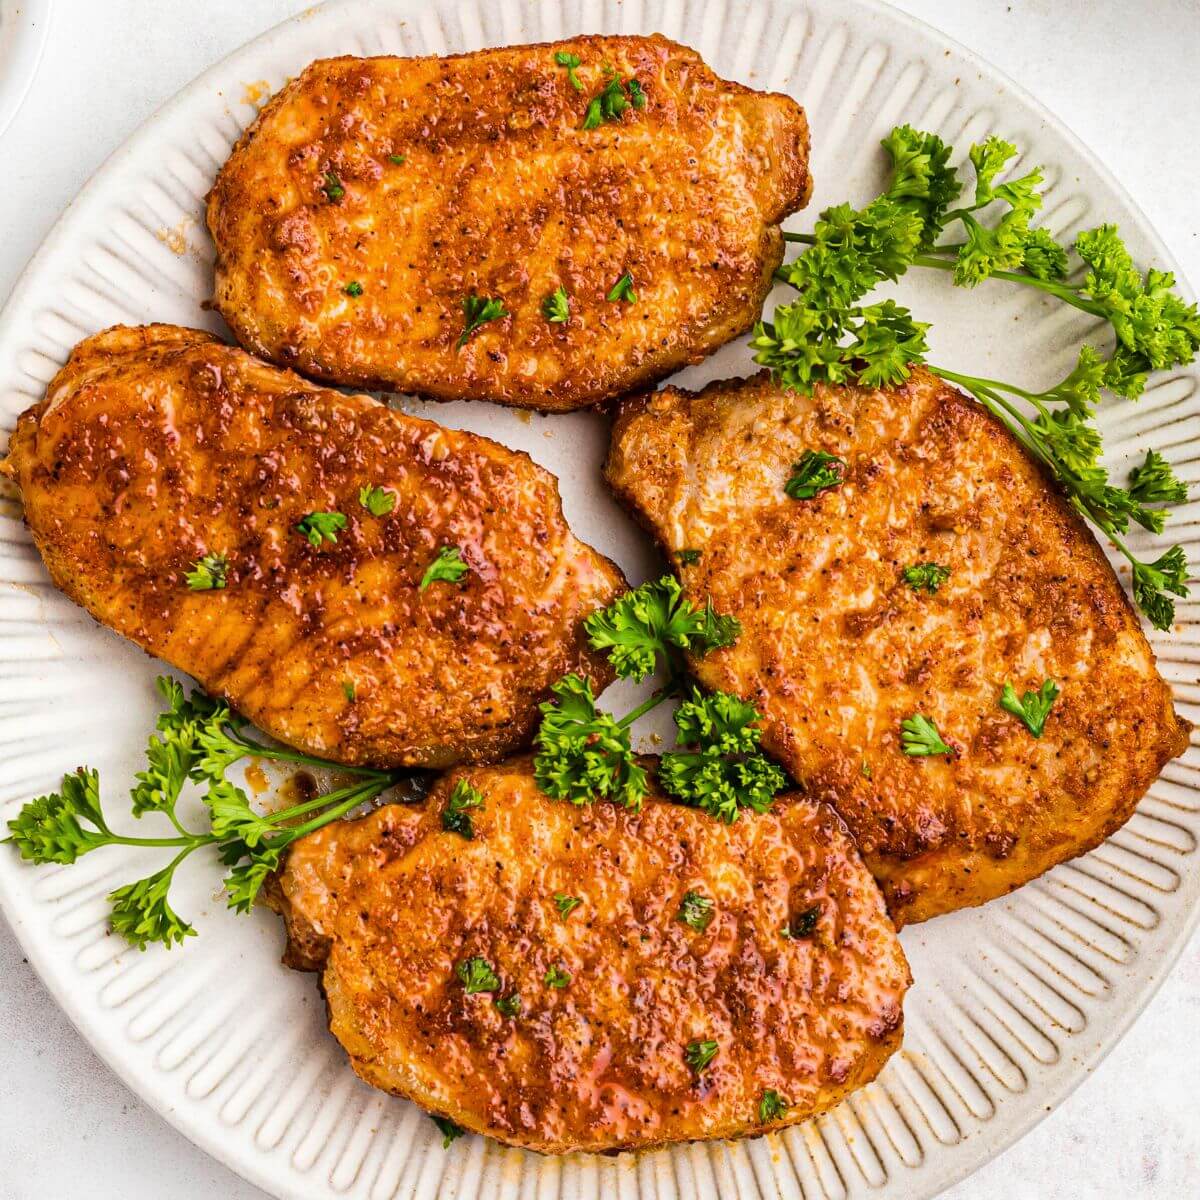 Golden juicy and seasoned pork chops on a white plate with parsley garnish.